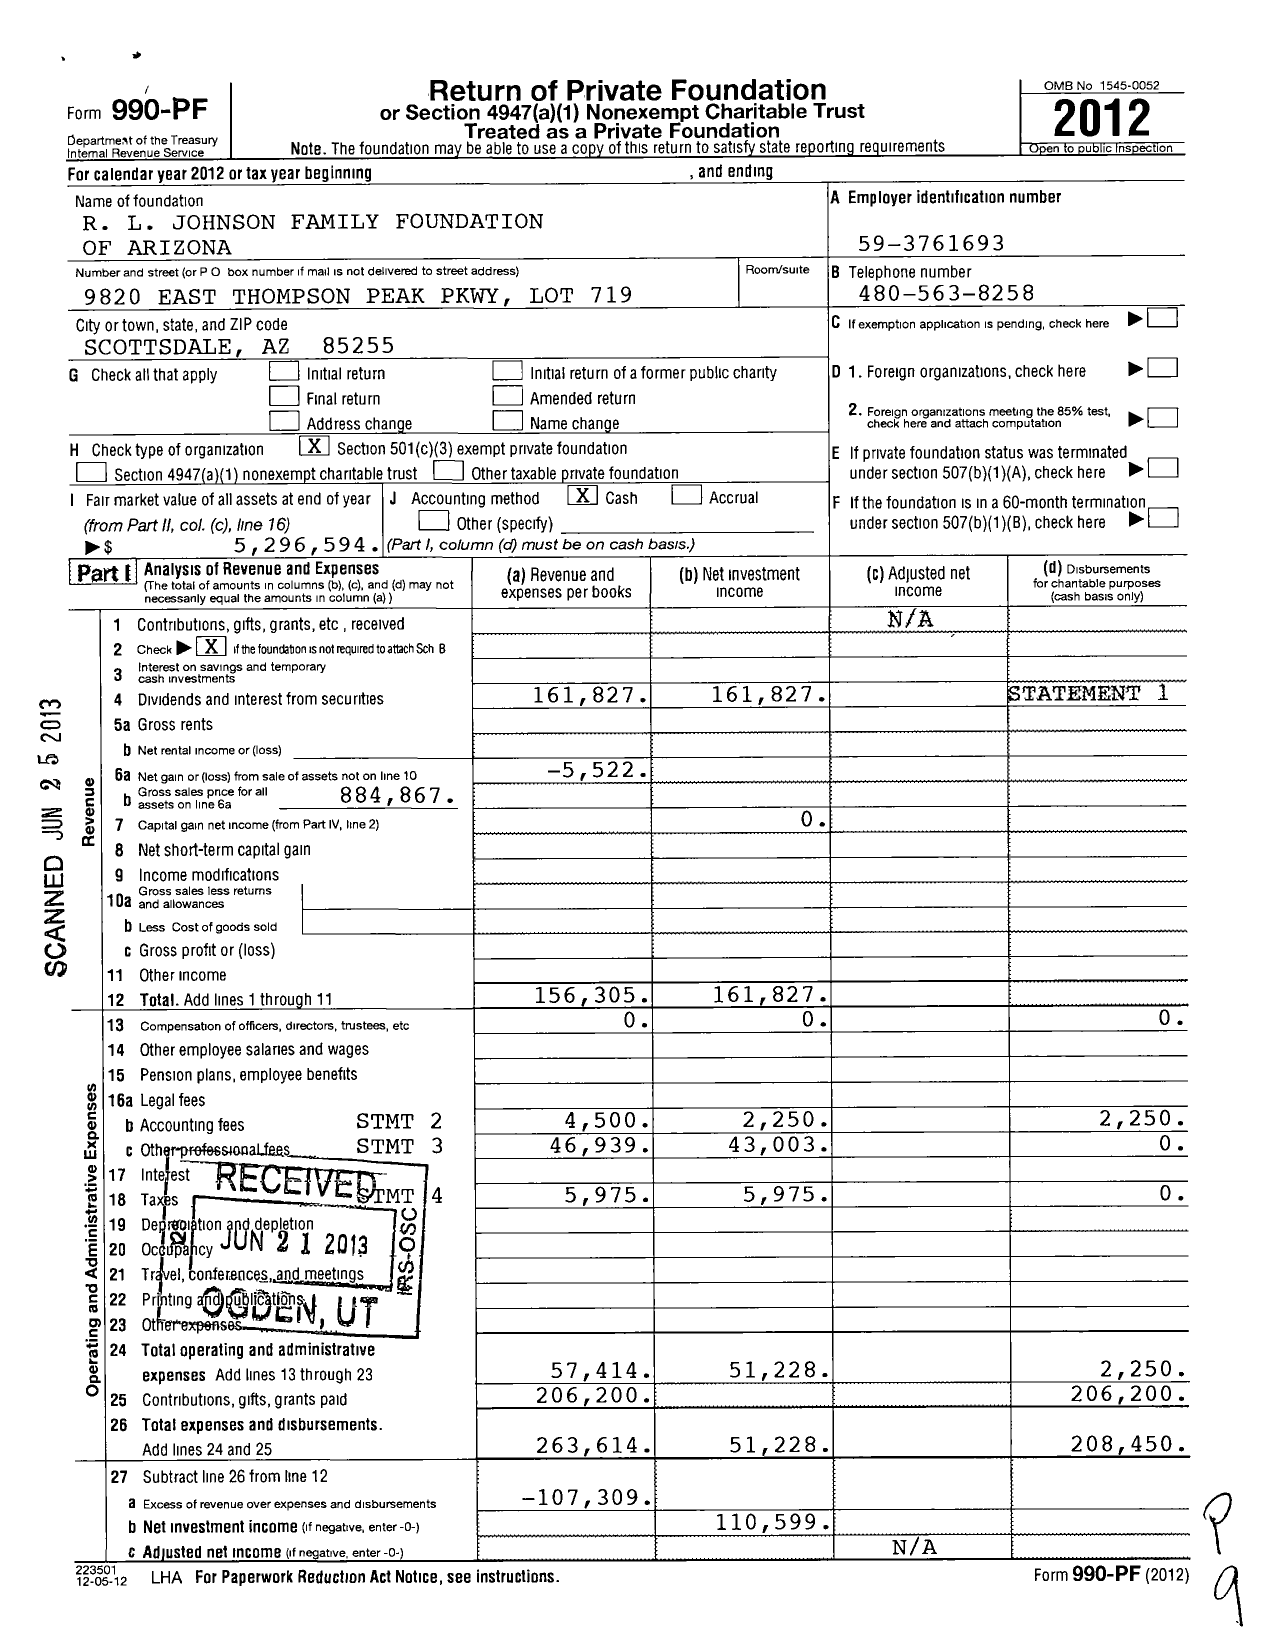 Image of first page of 2012 Form 990PF for R L Johnson Family Foundation of Arizona